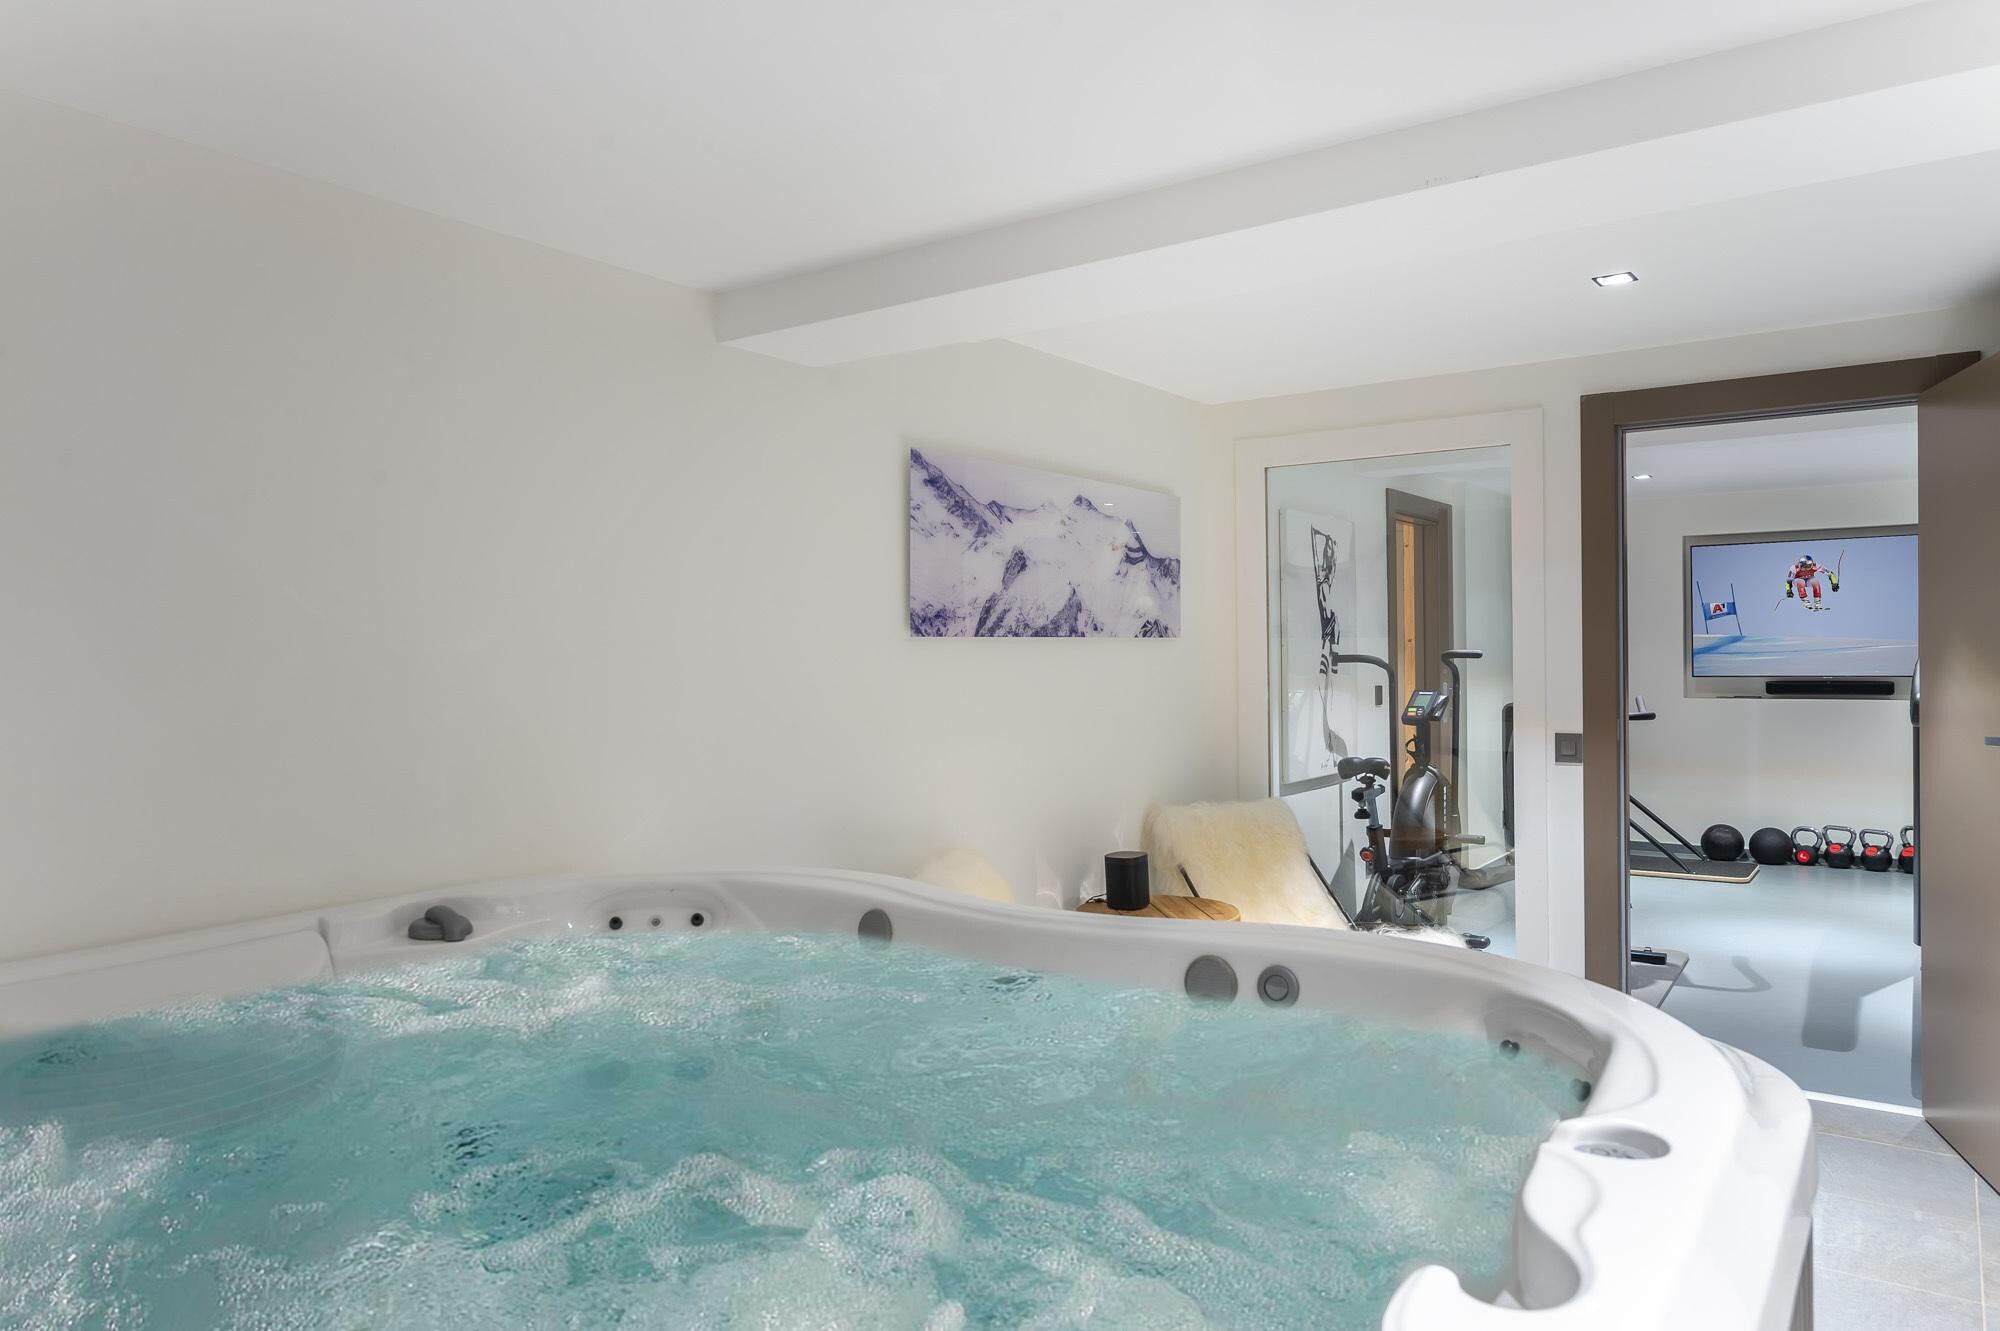 Property Image 2 - Courchevel Village, 5* Chalet with Jacuzzi and Private Gym. 5 bedrooms, sleeps 10